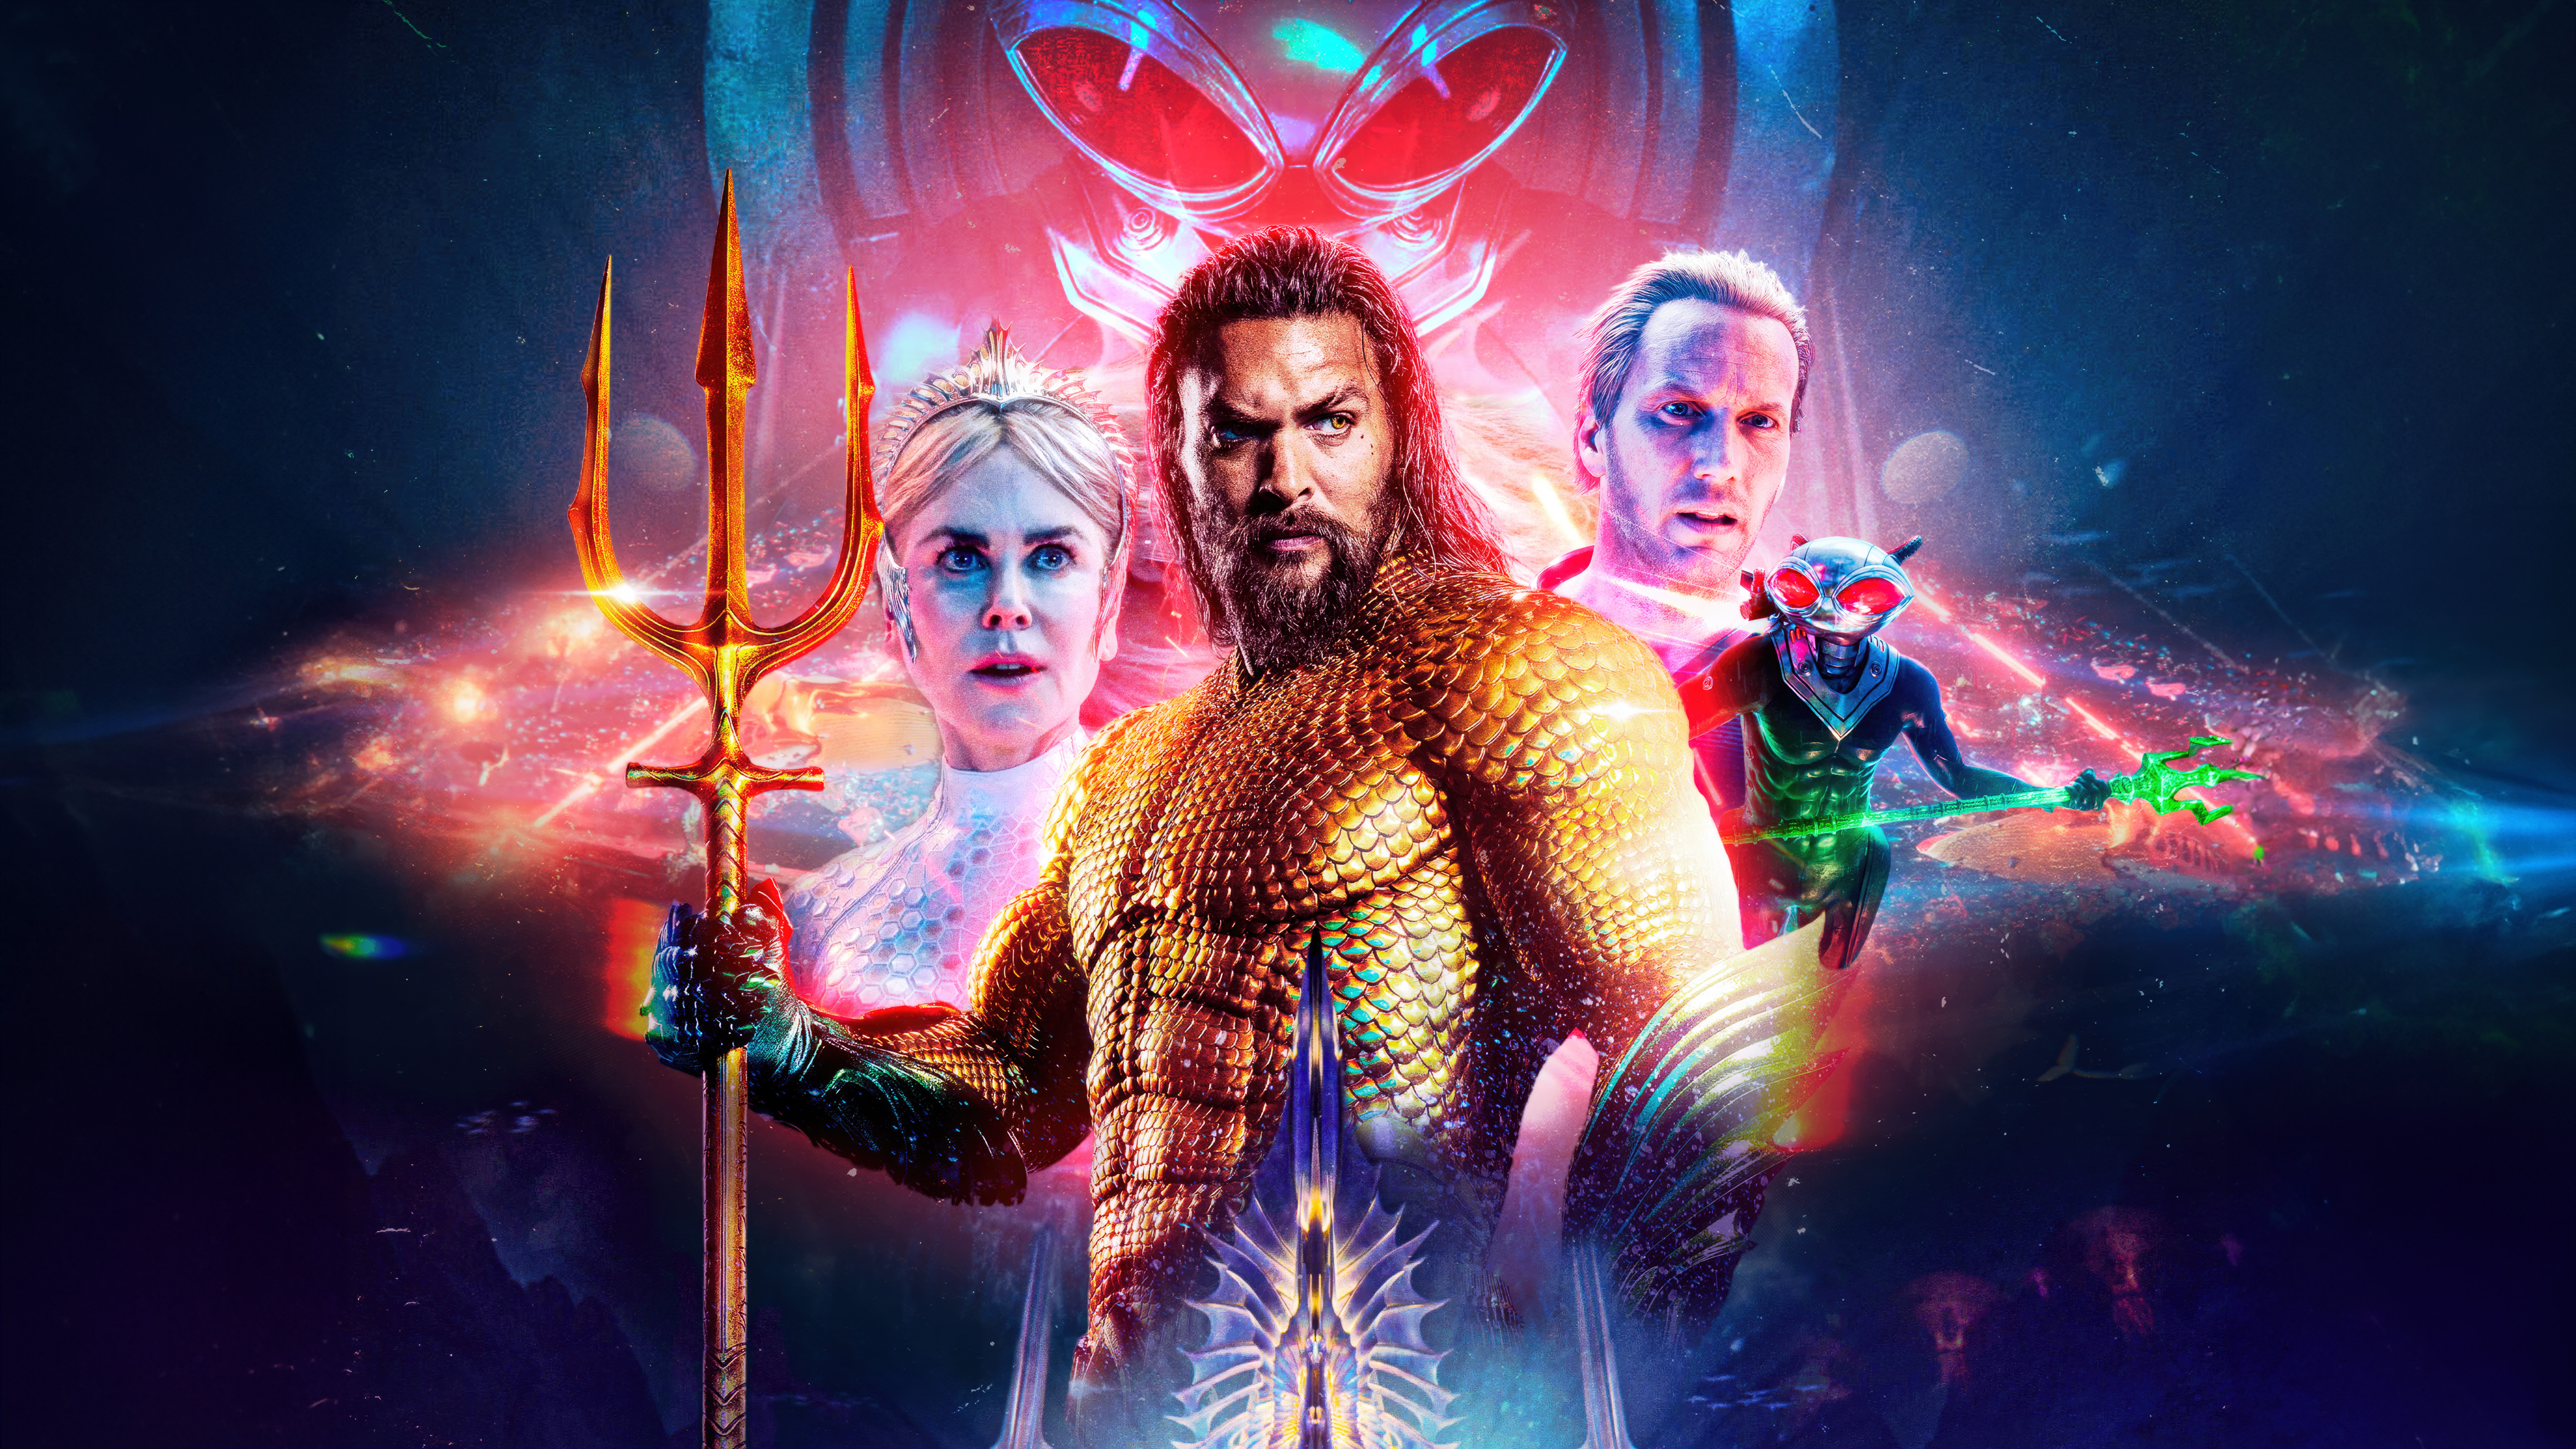 Aquaman And The Lost Kingdom Movie 5k Wallpaper, HD Movies Wallpaper, 4k Wallpaper, Image, Background, Photos and Picture